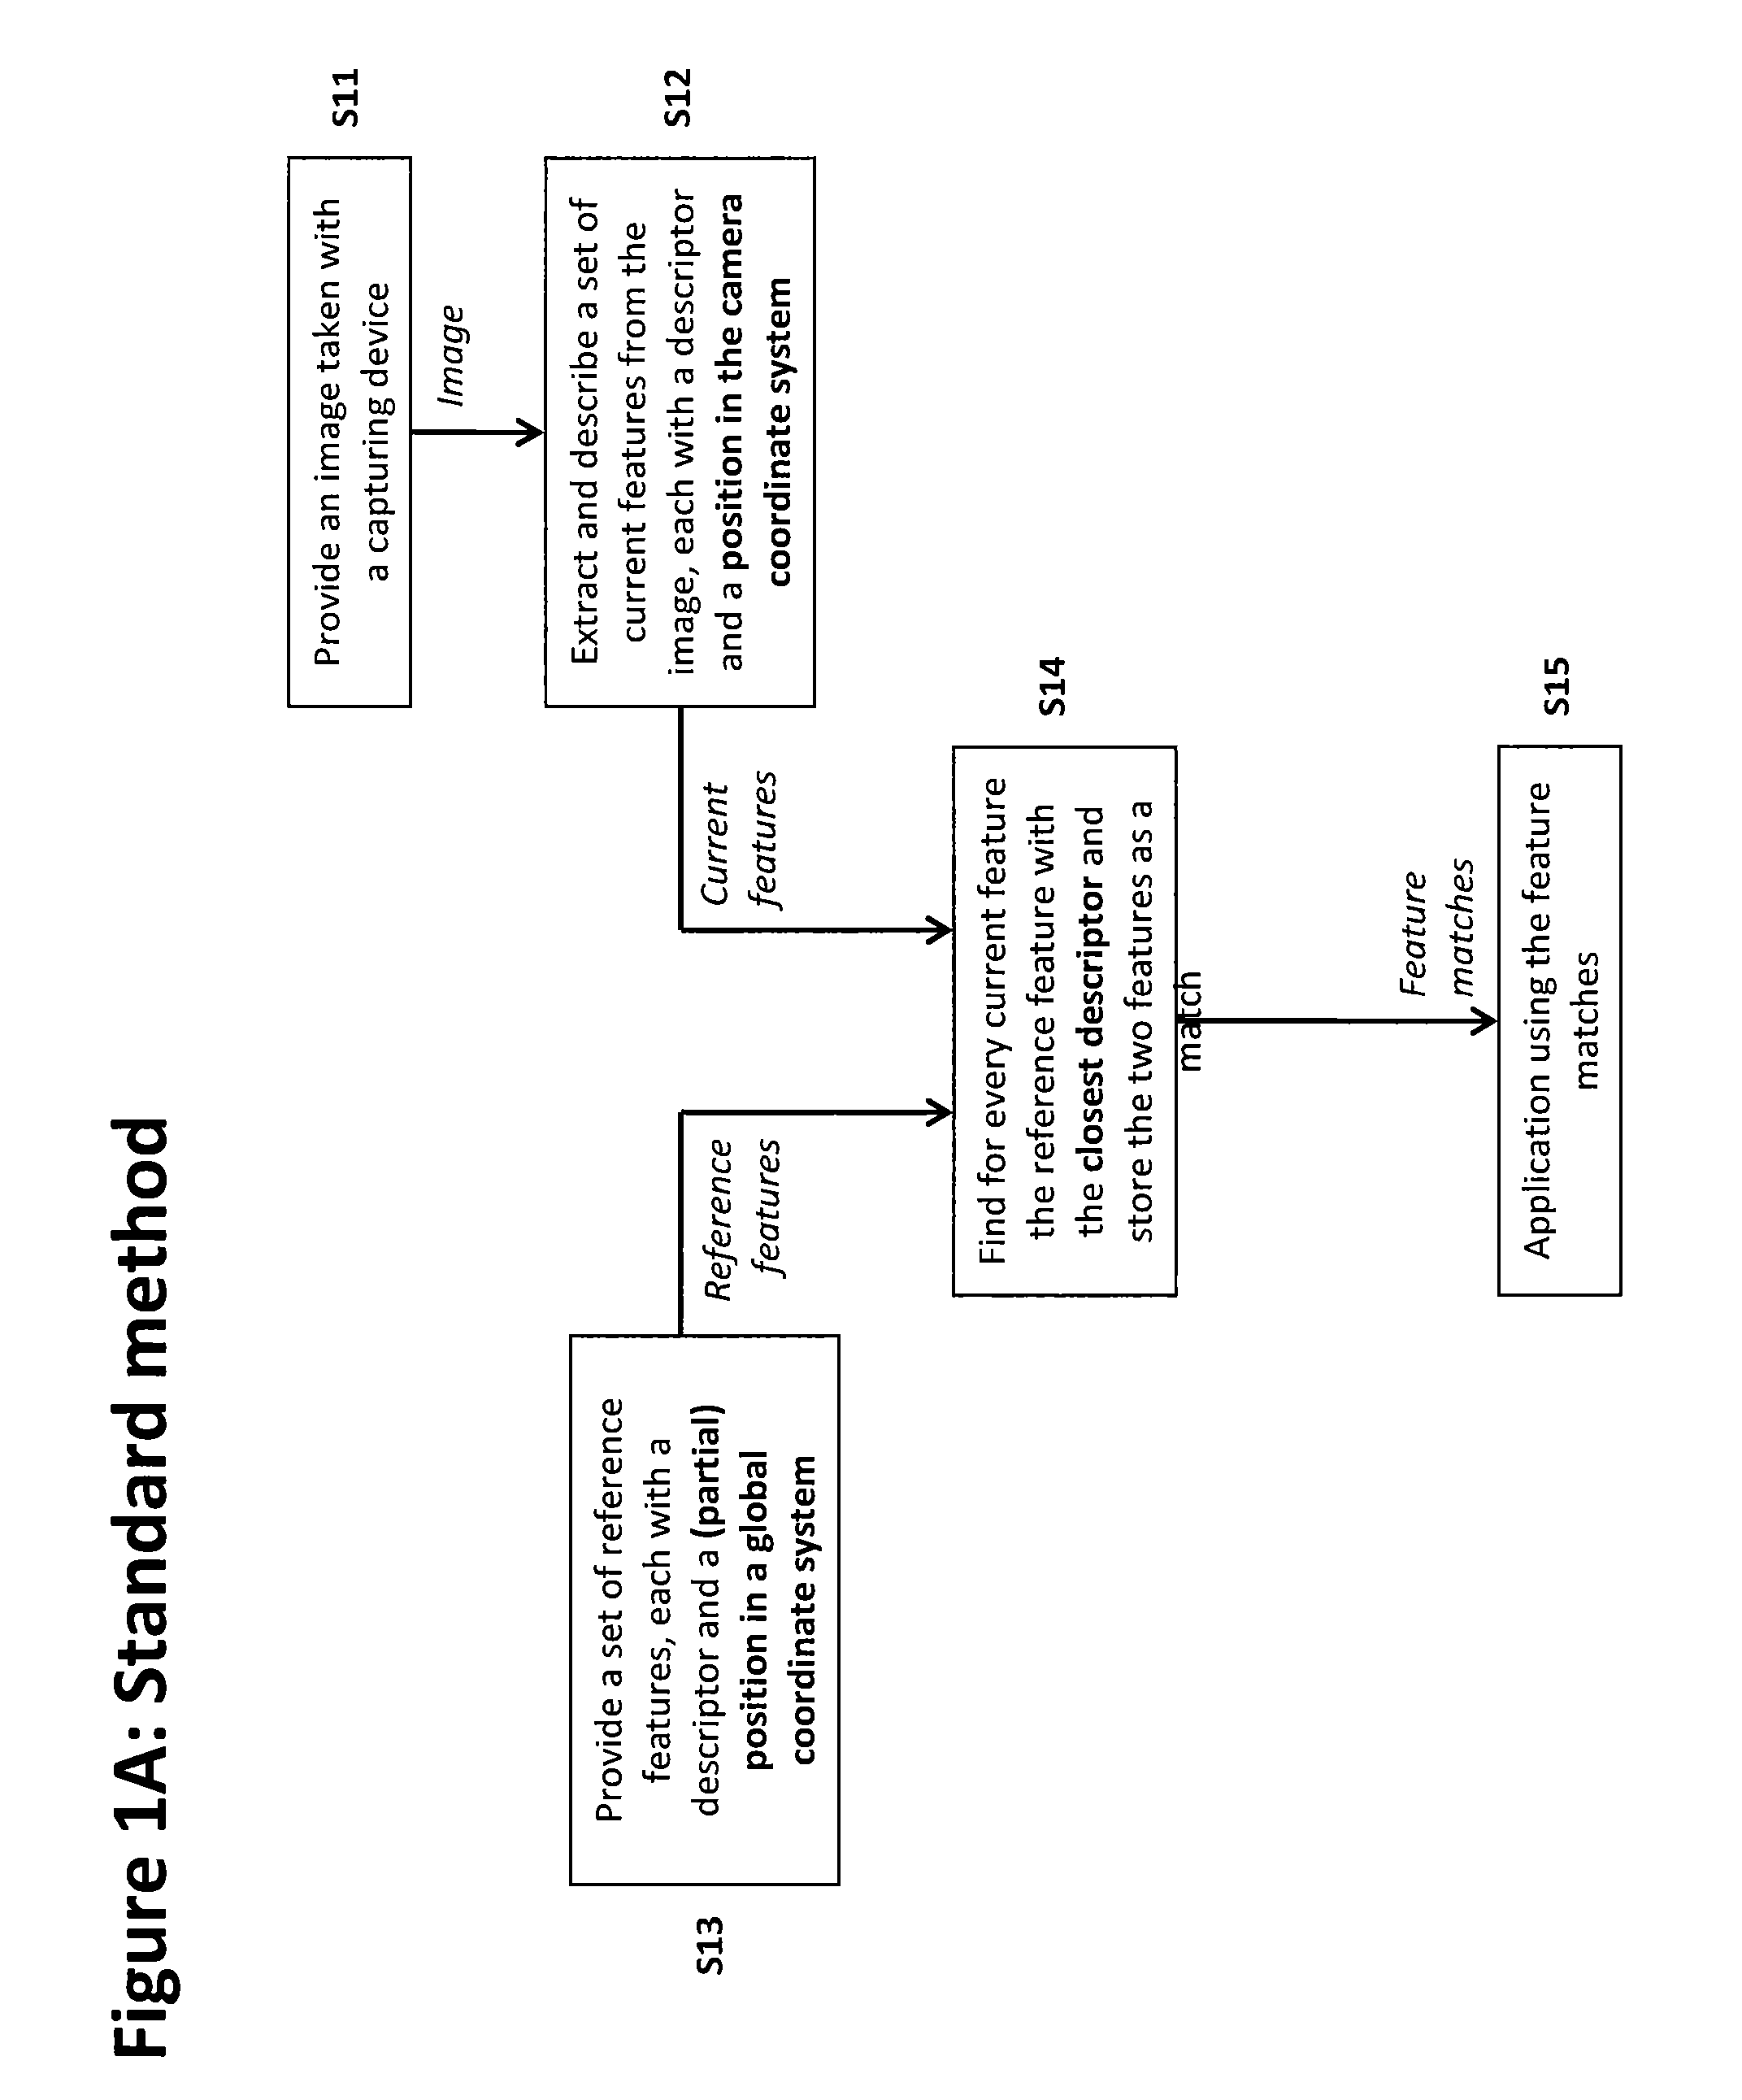 Method of matching image features with reference features